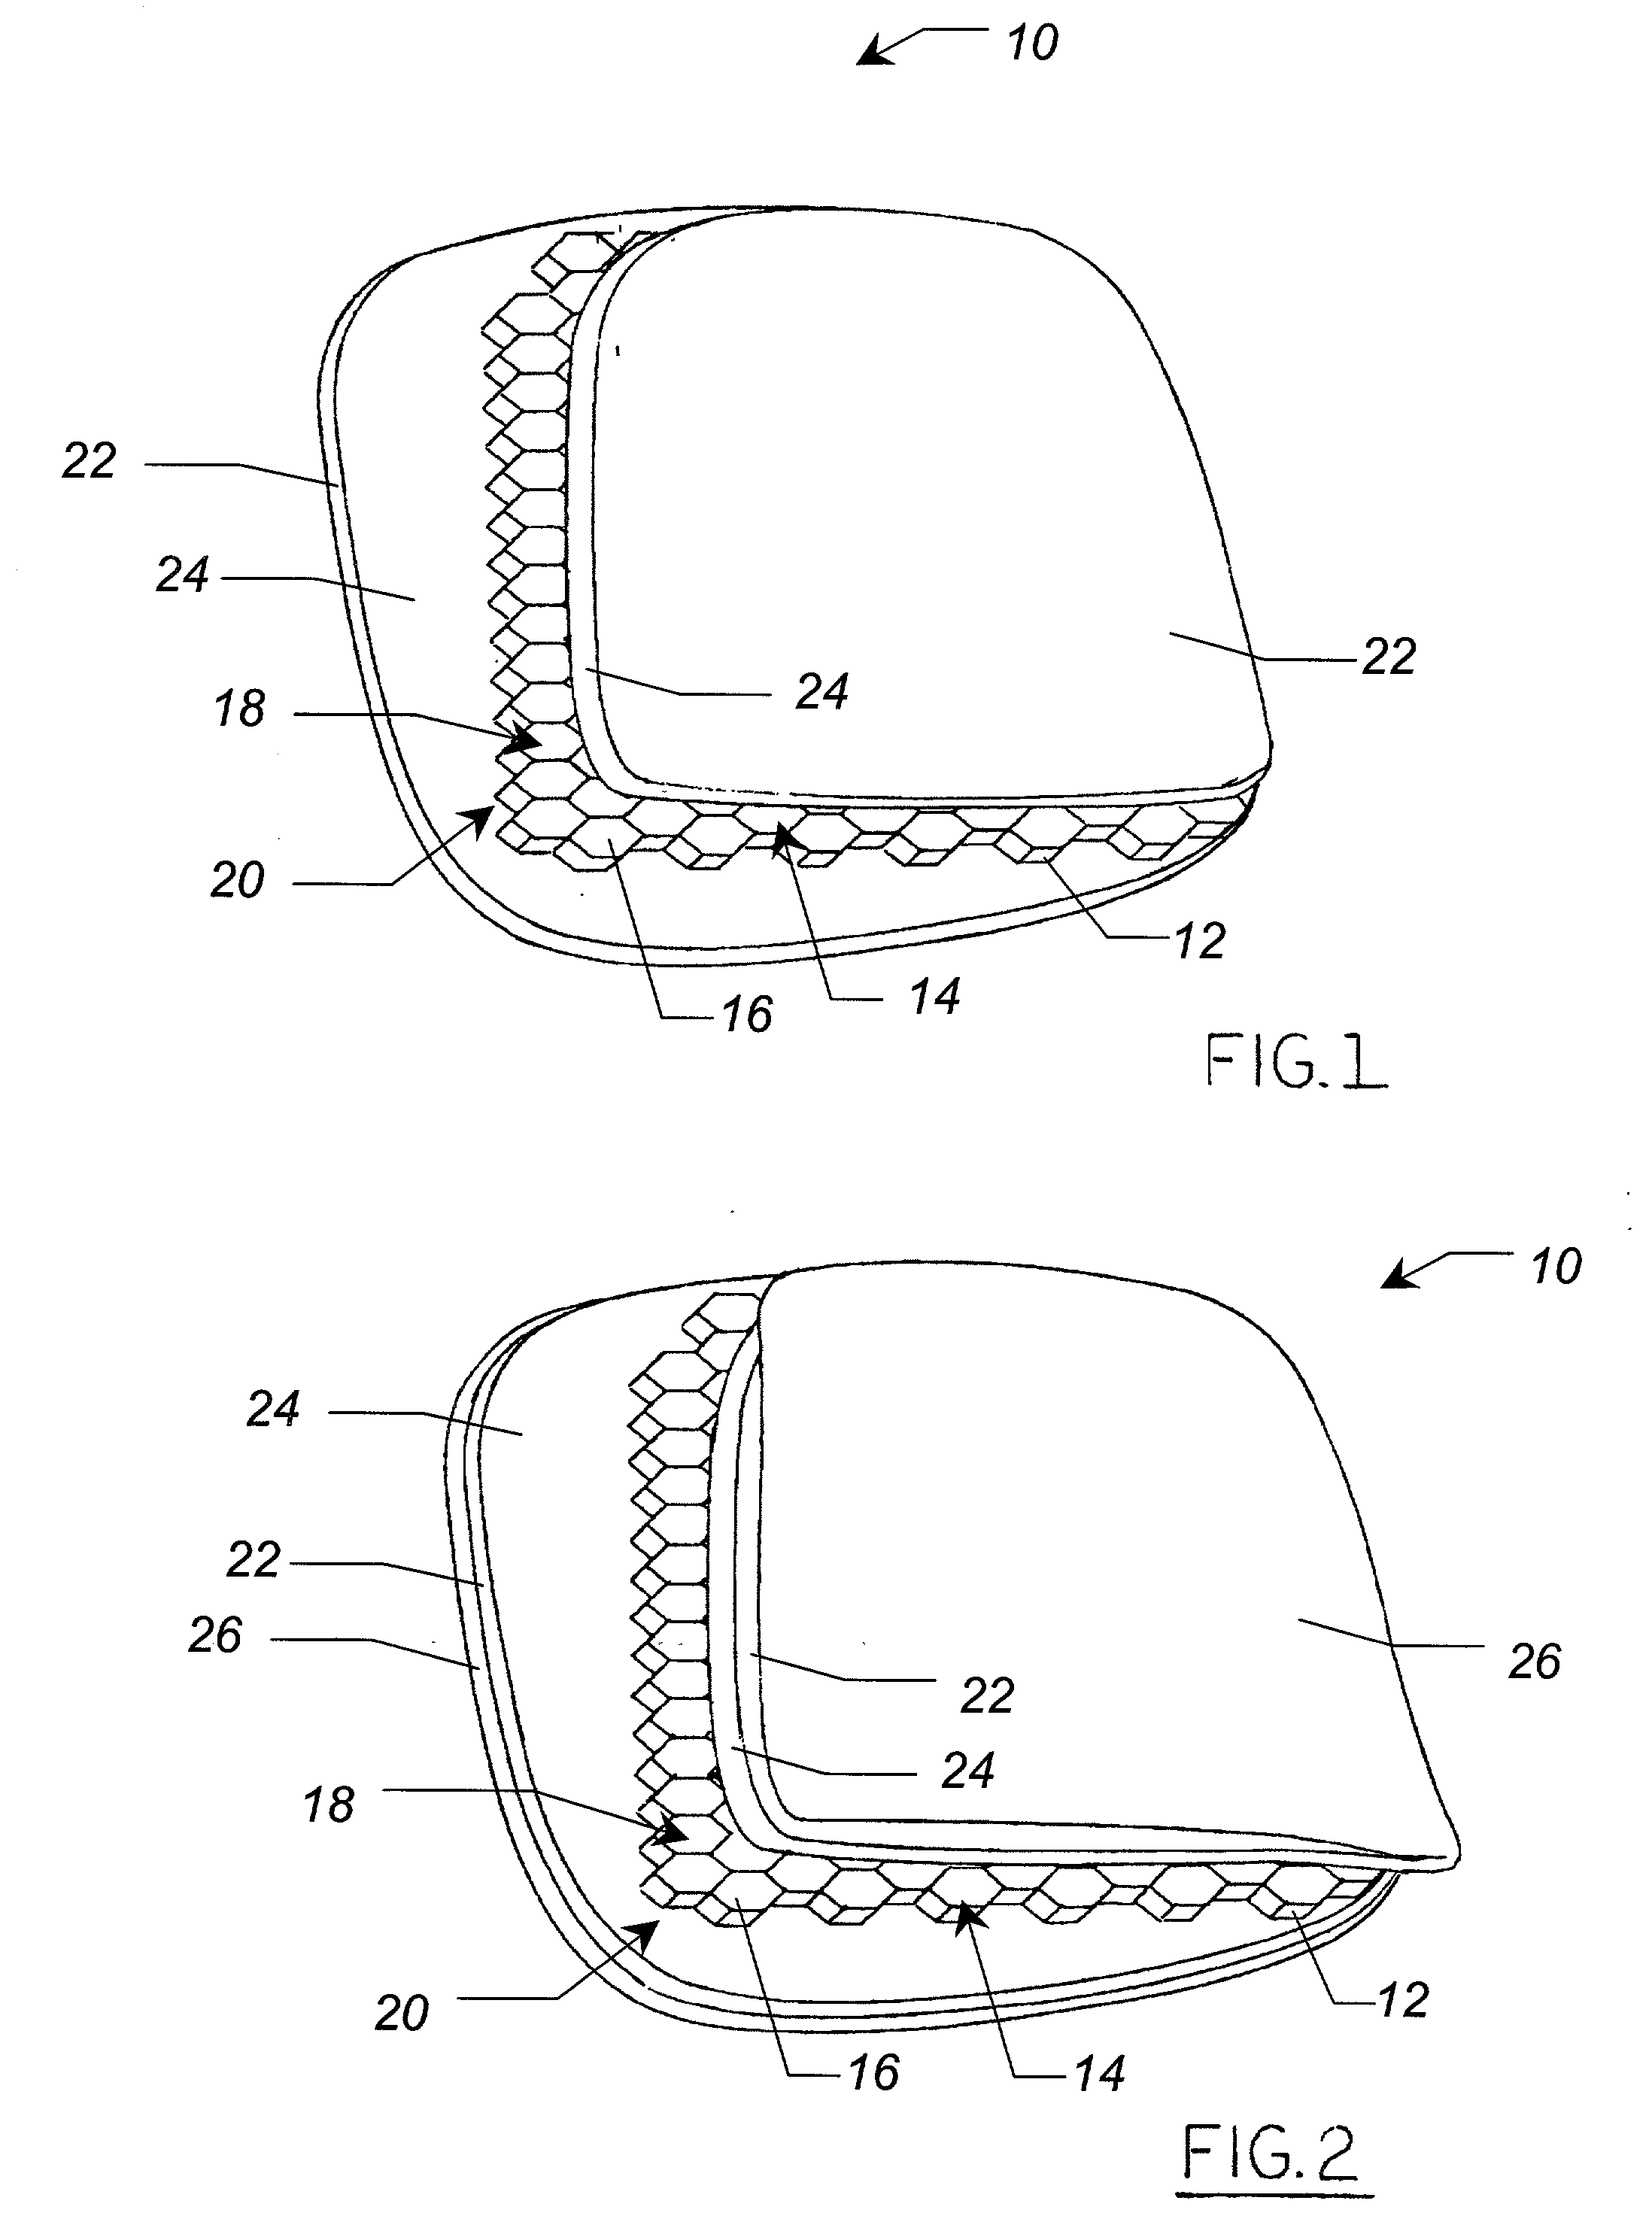 Liquid molded hollow cell core composite articles